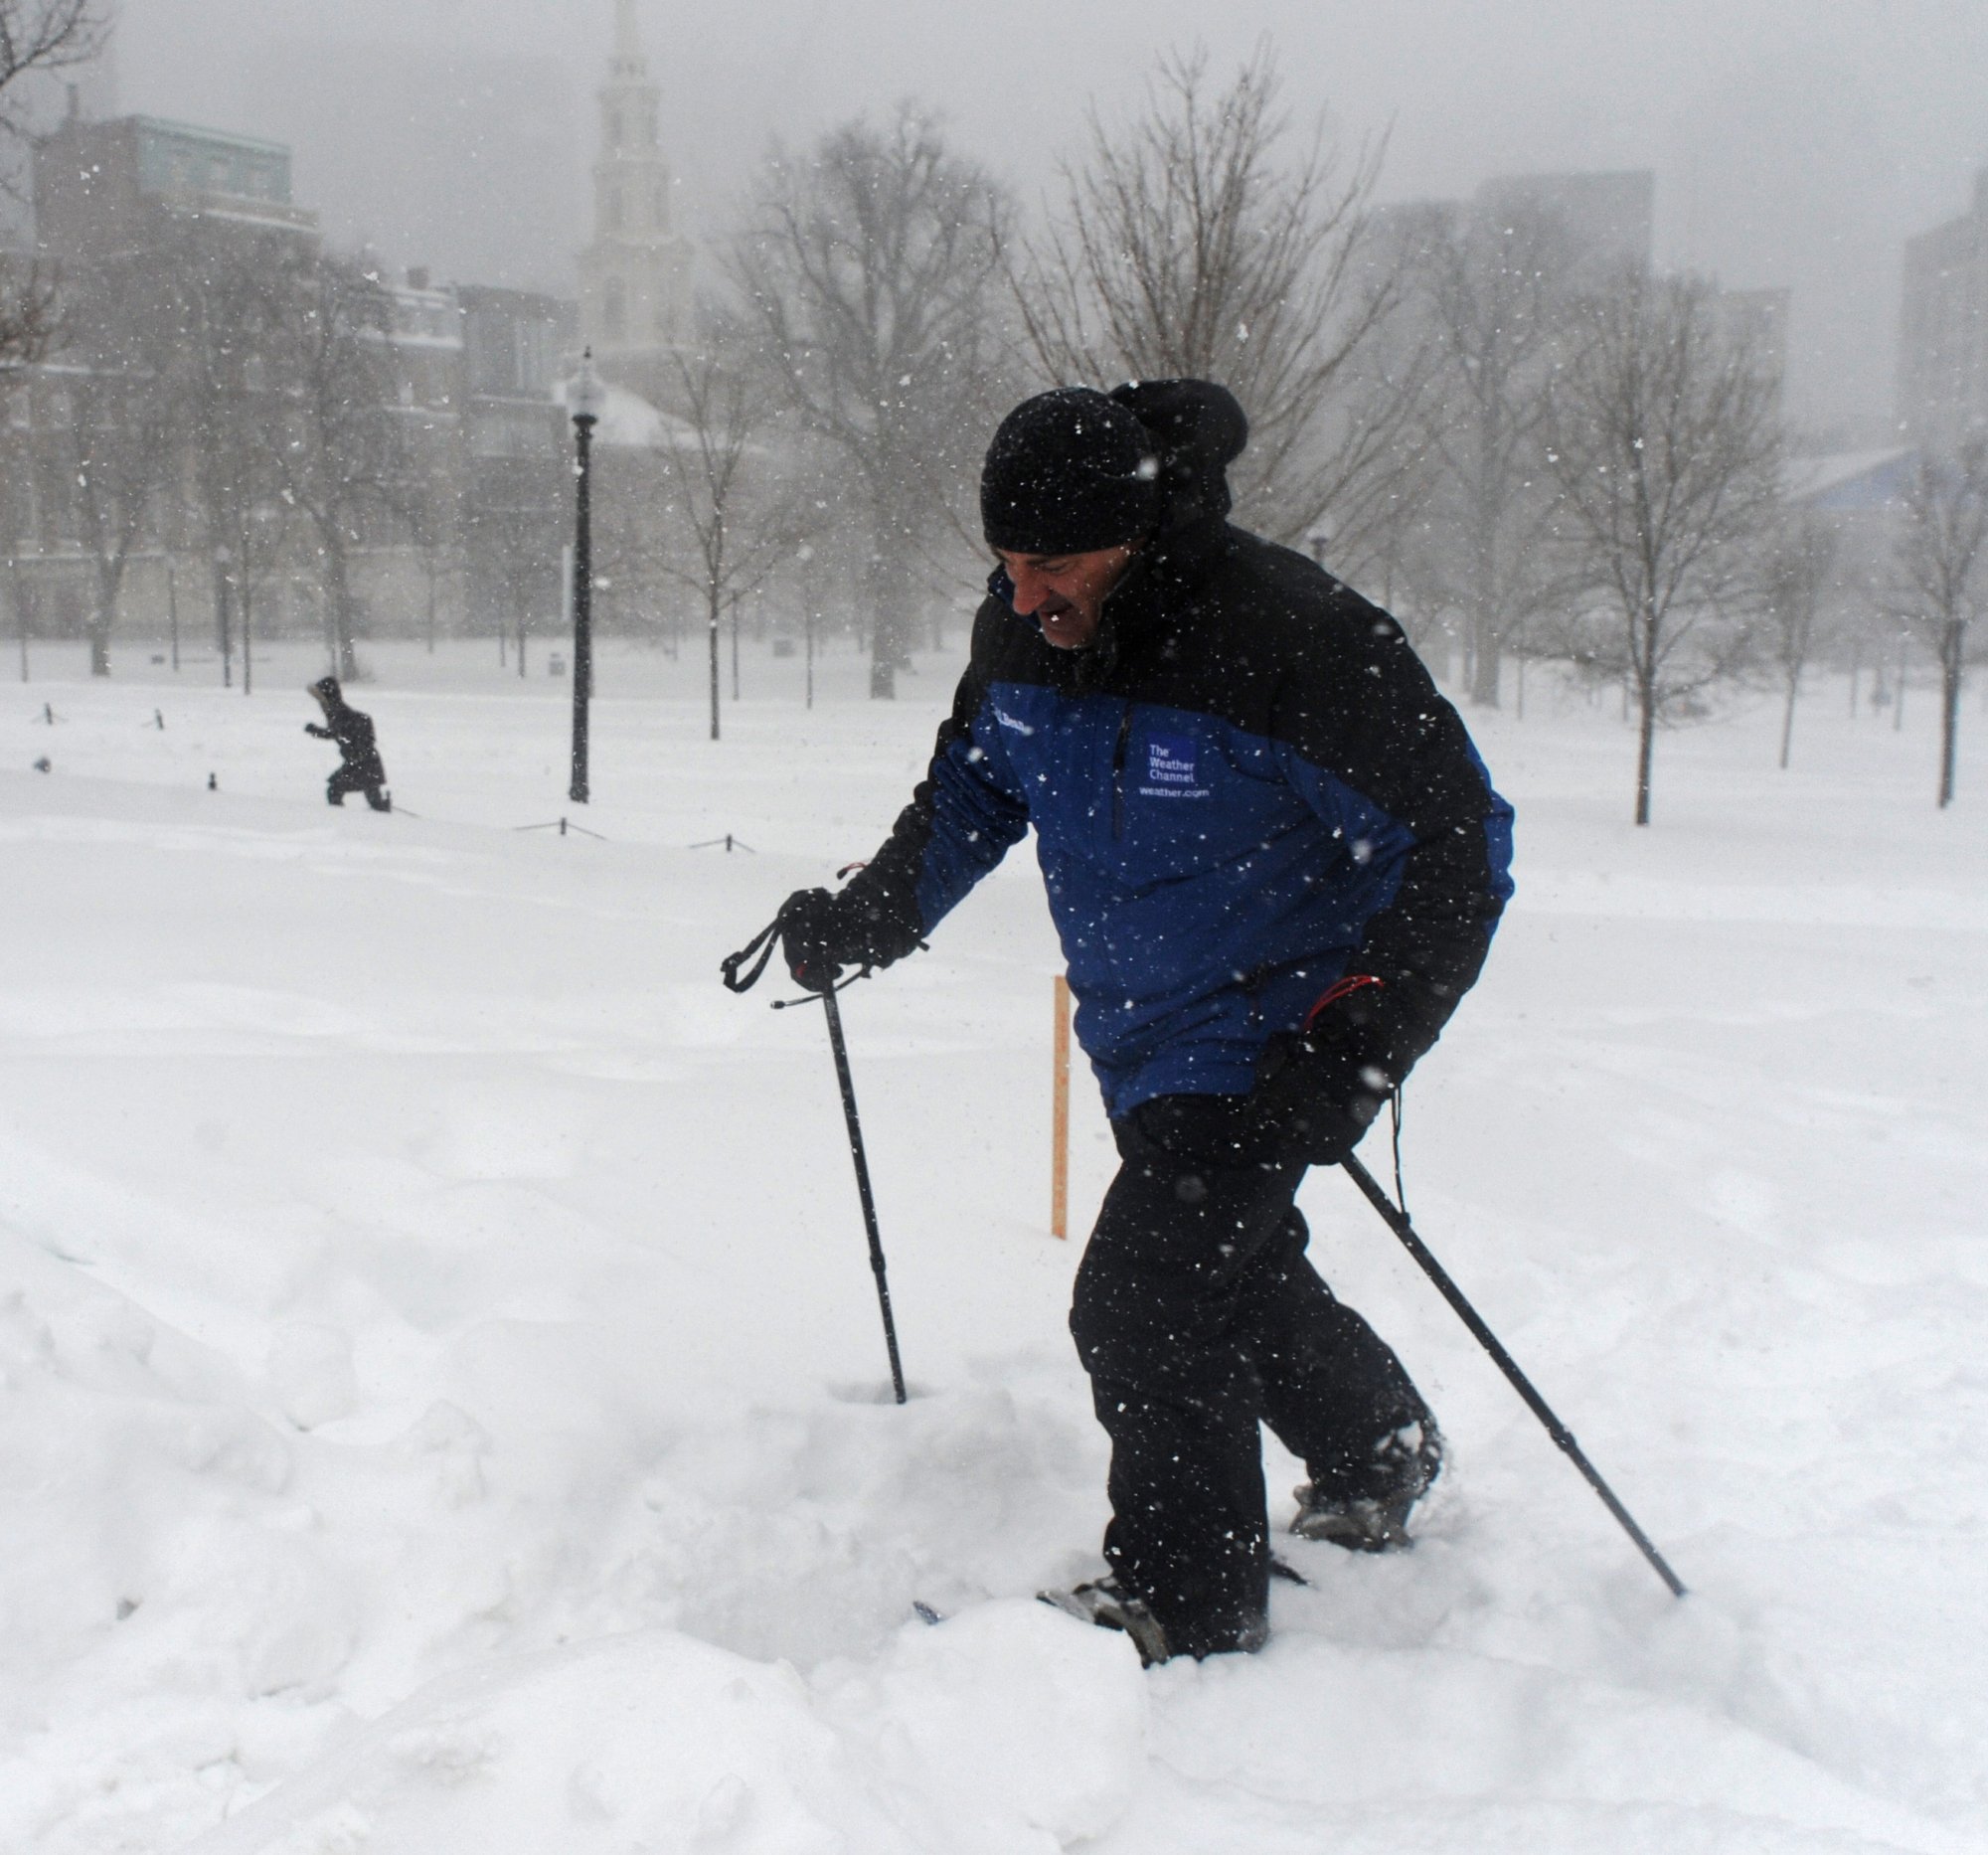 'The Weather Channel' meteorologist Jim Cantore walking through the snow as he reports on a blizzard in Boston